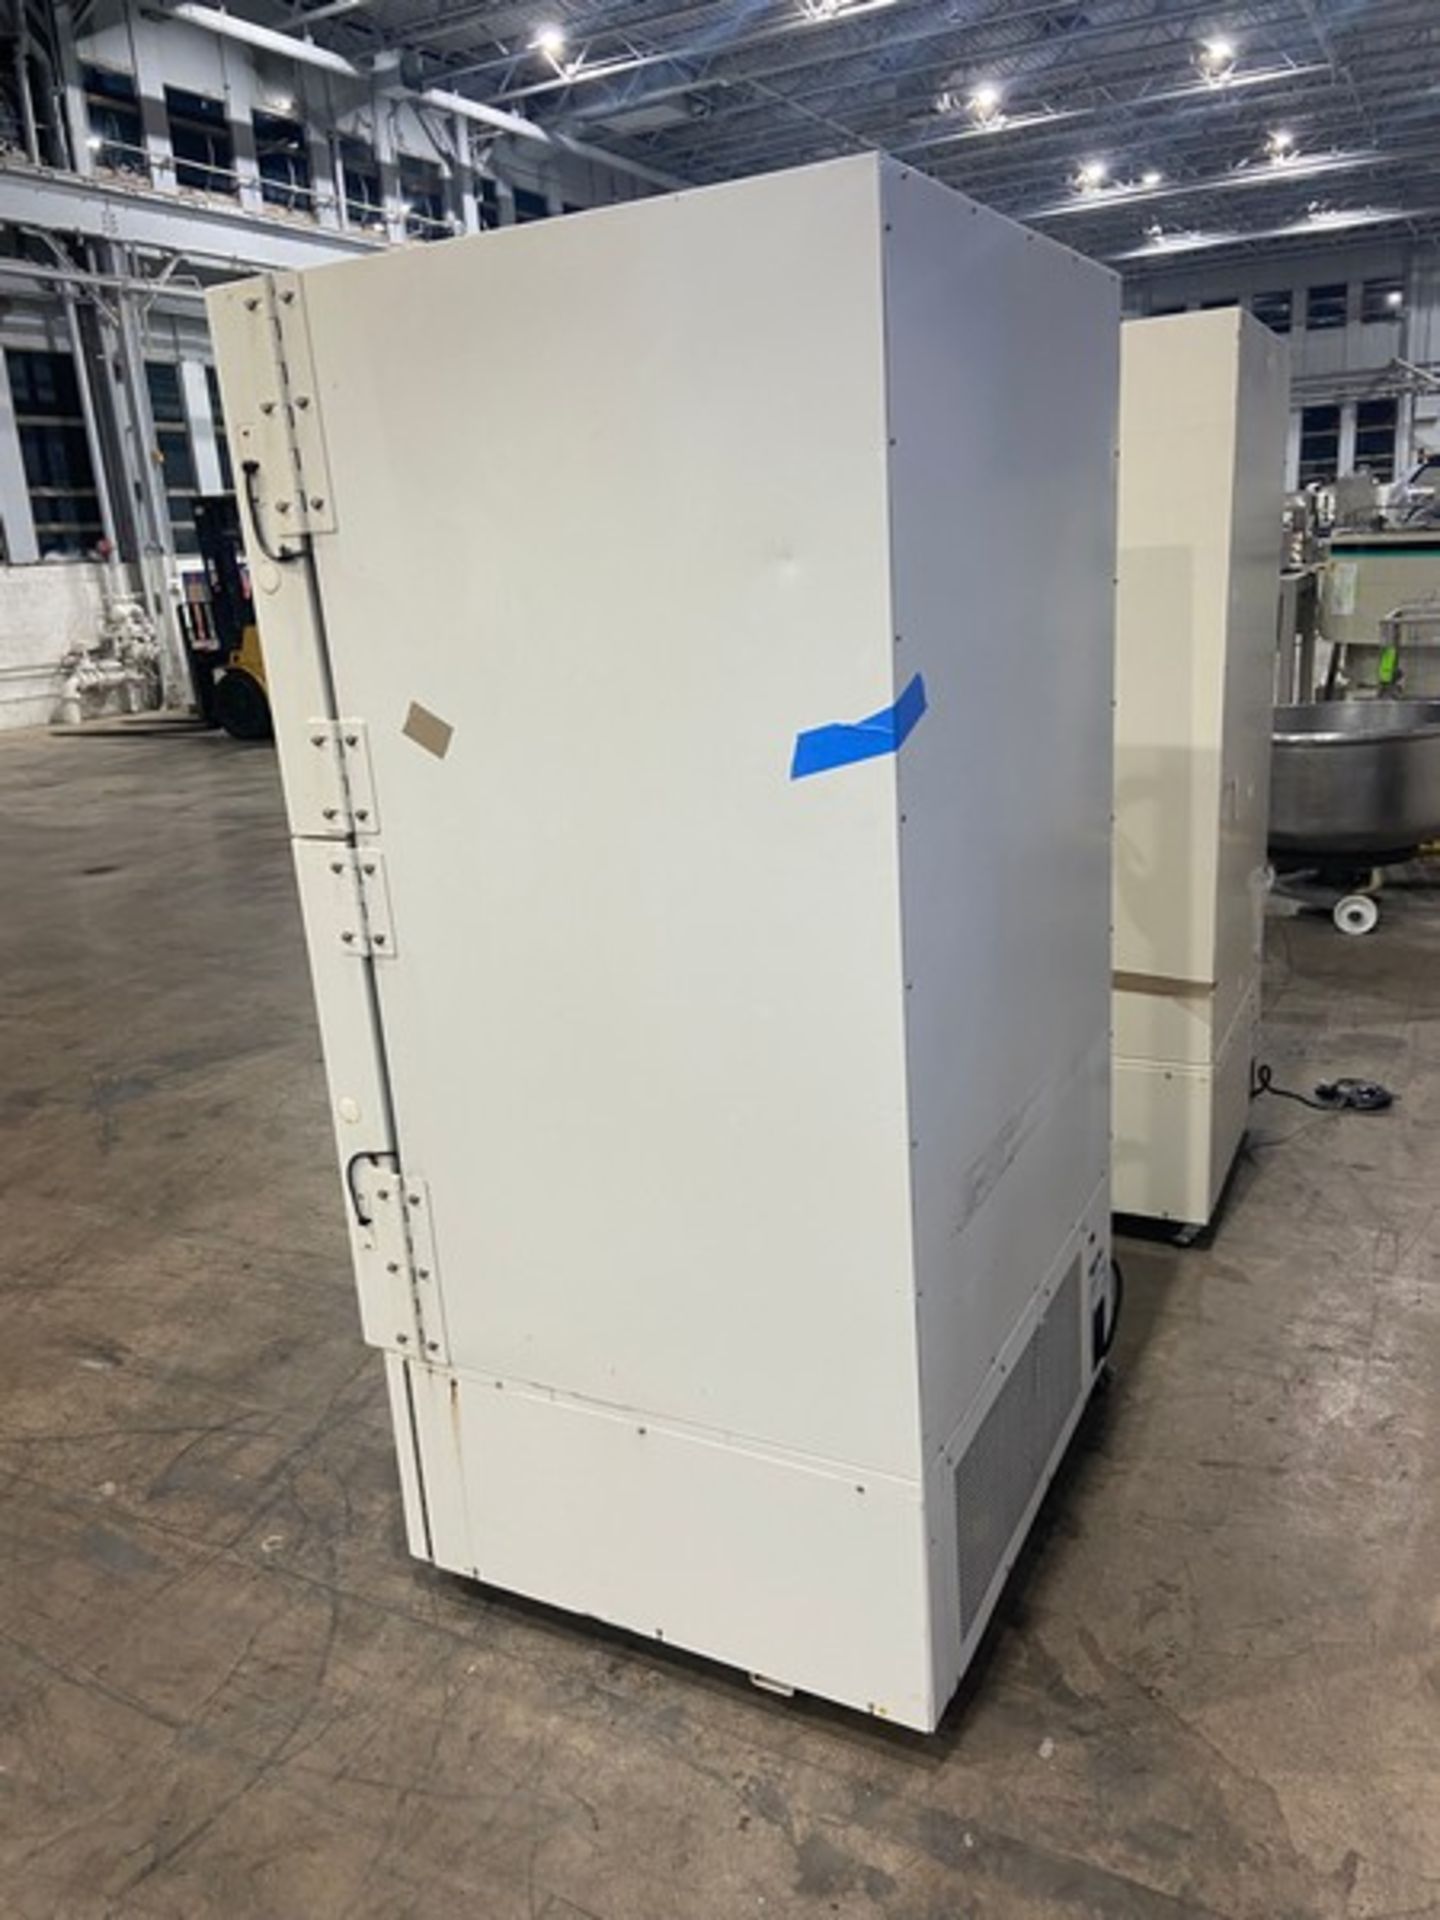 Thermo Electron Corporation ULT Laboratory Freezer , Forma -86C, M/N 8695, S/N 806718, 230 Volts, - Image 3 of 6